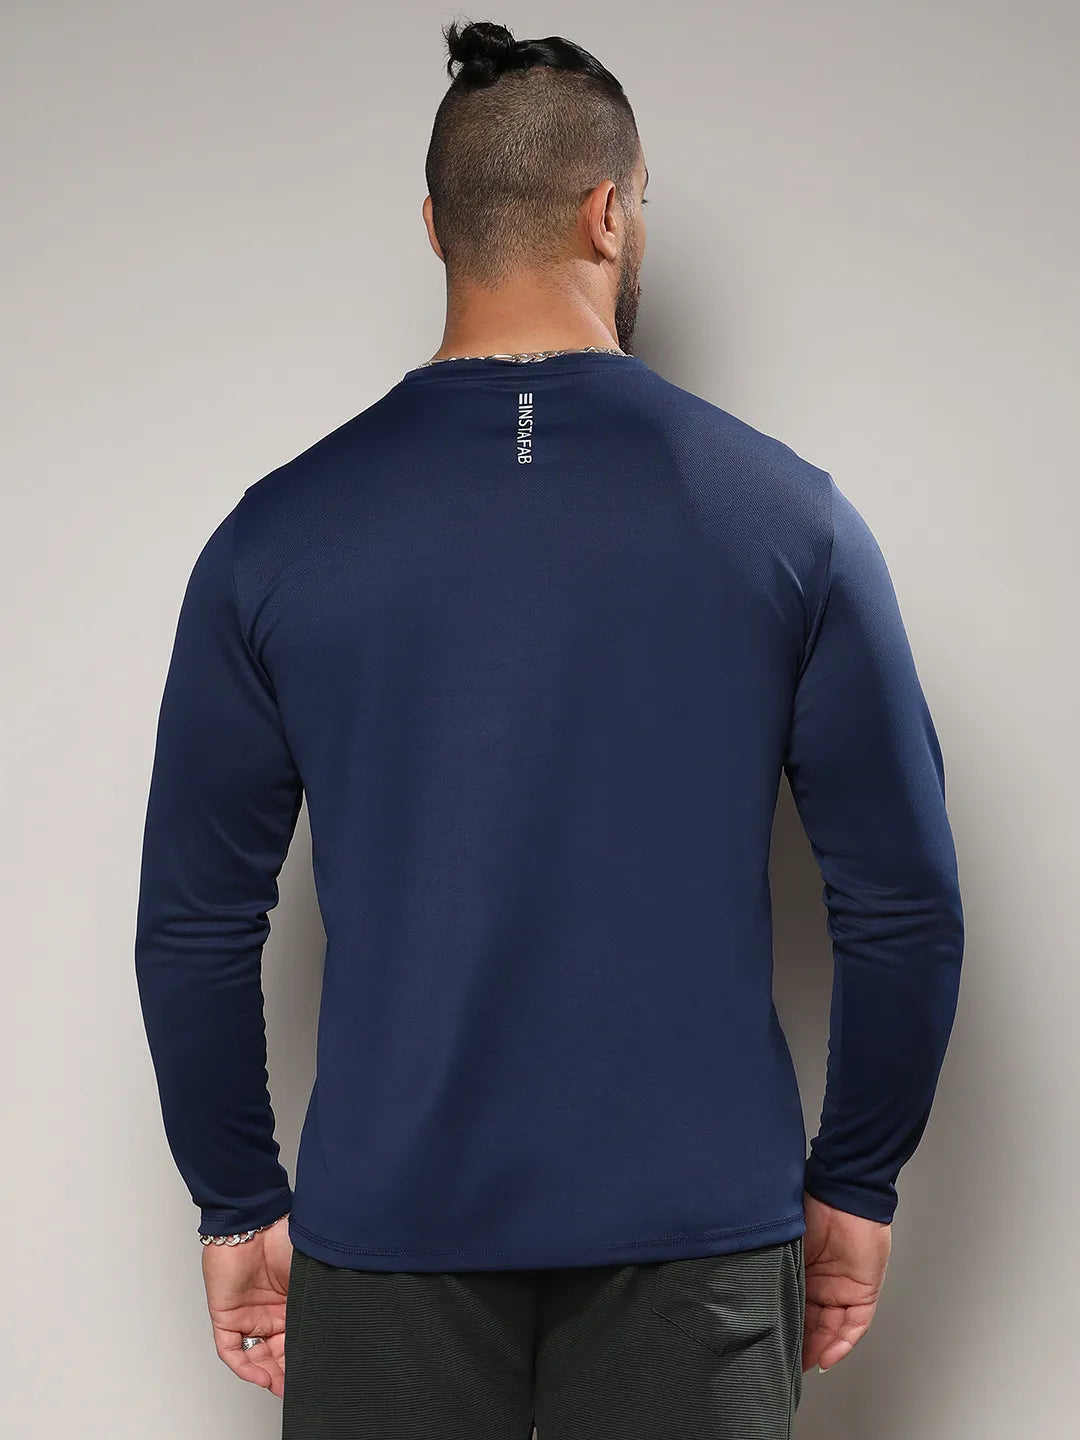 Solid Navy Blue Activewear T-Shirt